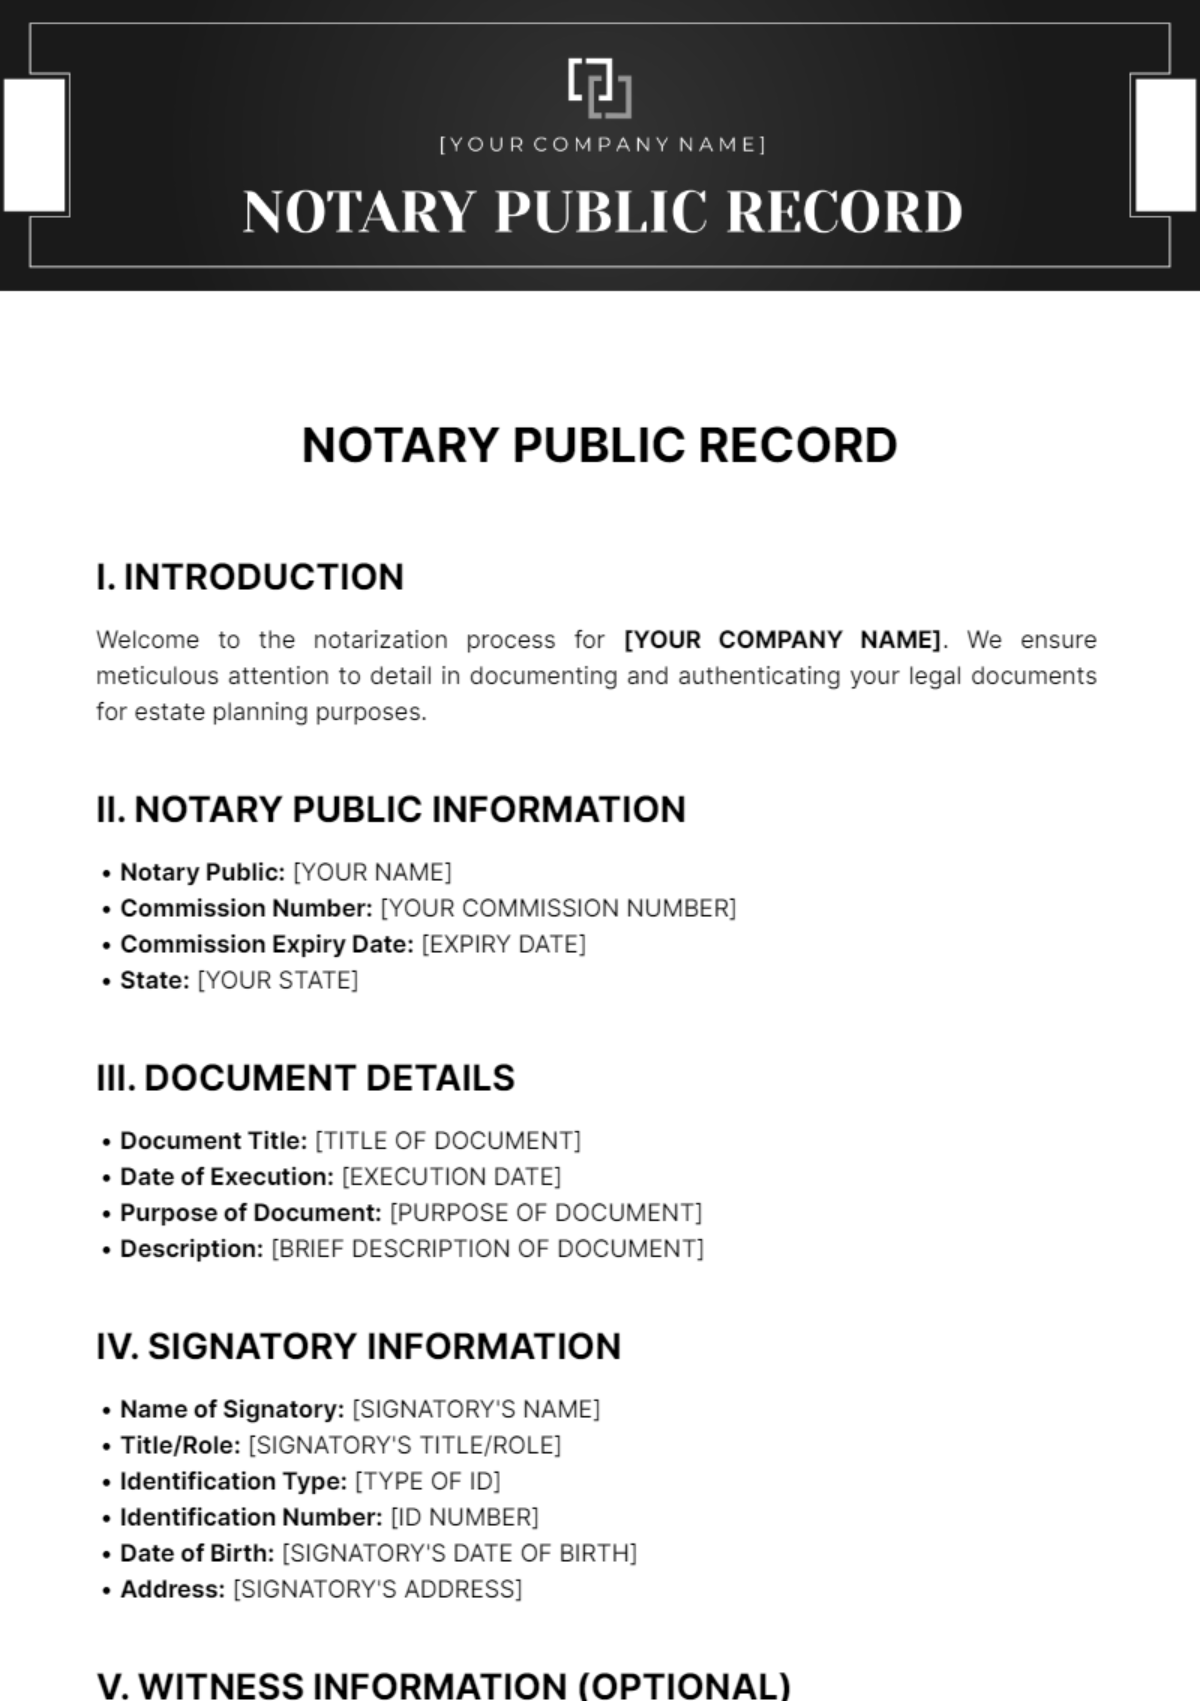 Free Notary Public Record Template